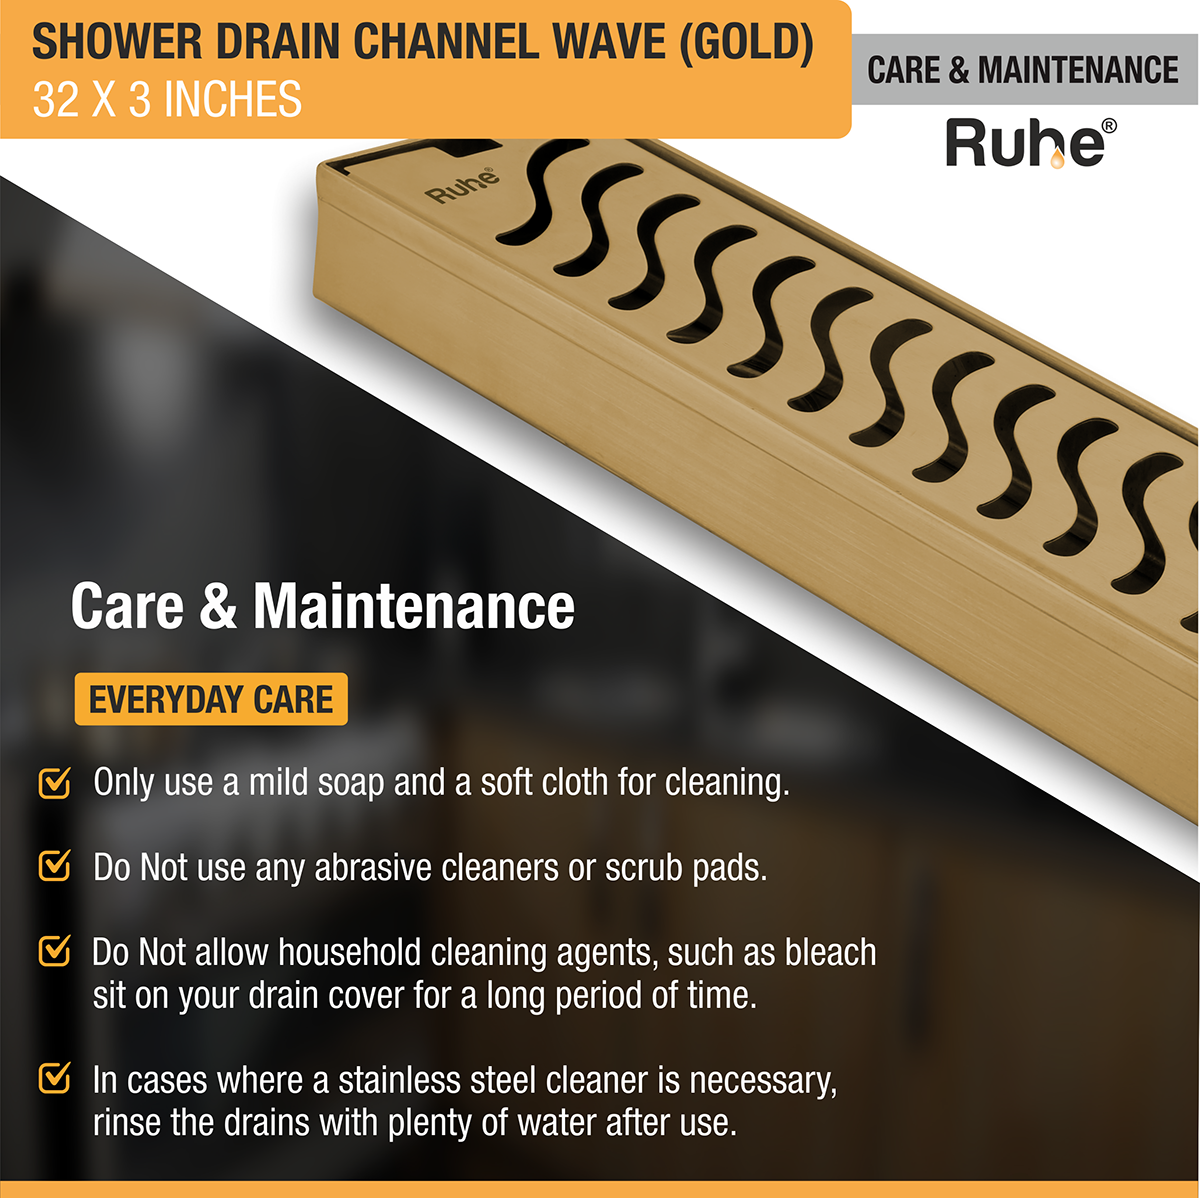 Wave Shower Drain Channel (32 x 3 Inches) YELLOW GOLD care and maintenance